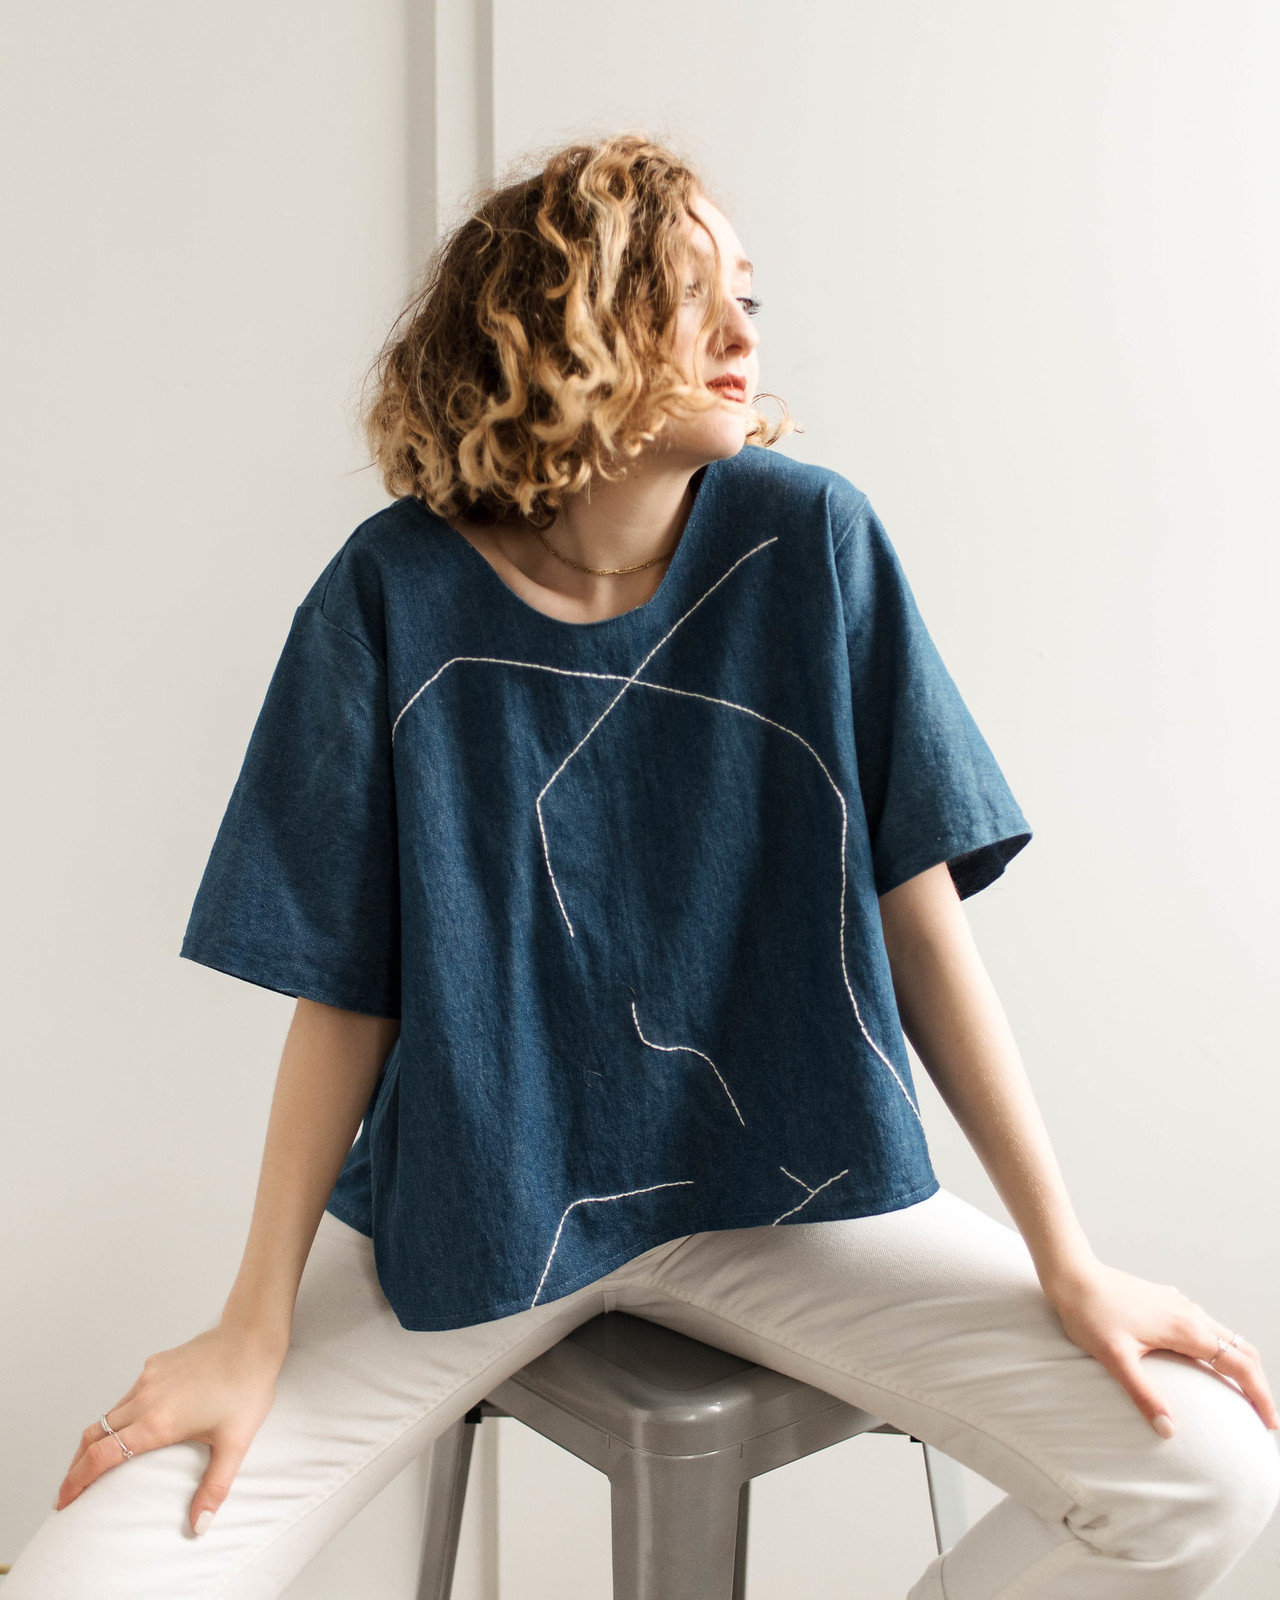 jaelle designs ethical and sustainable clothing line on juliettelaura.com